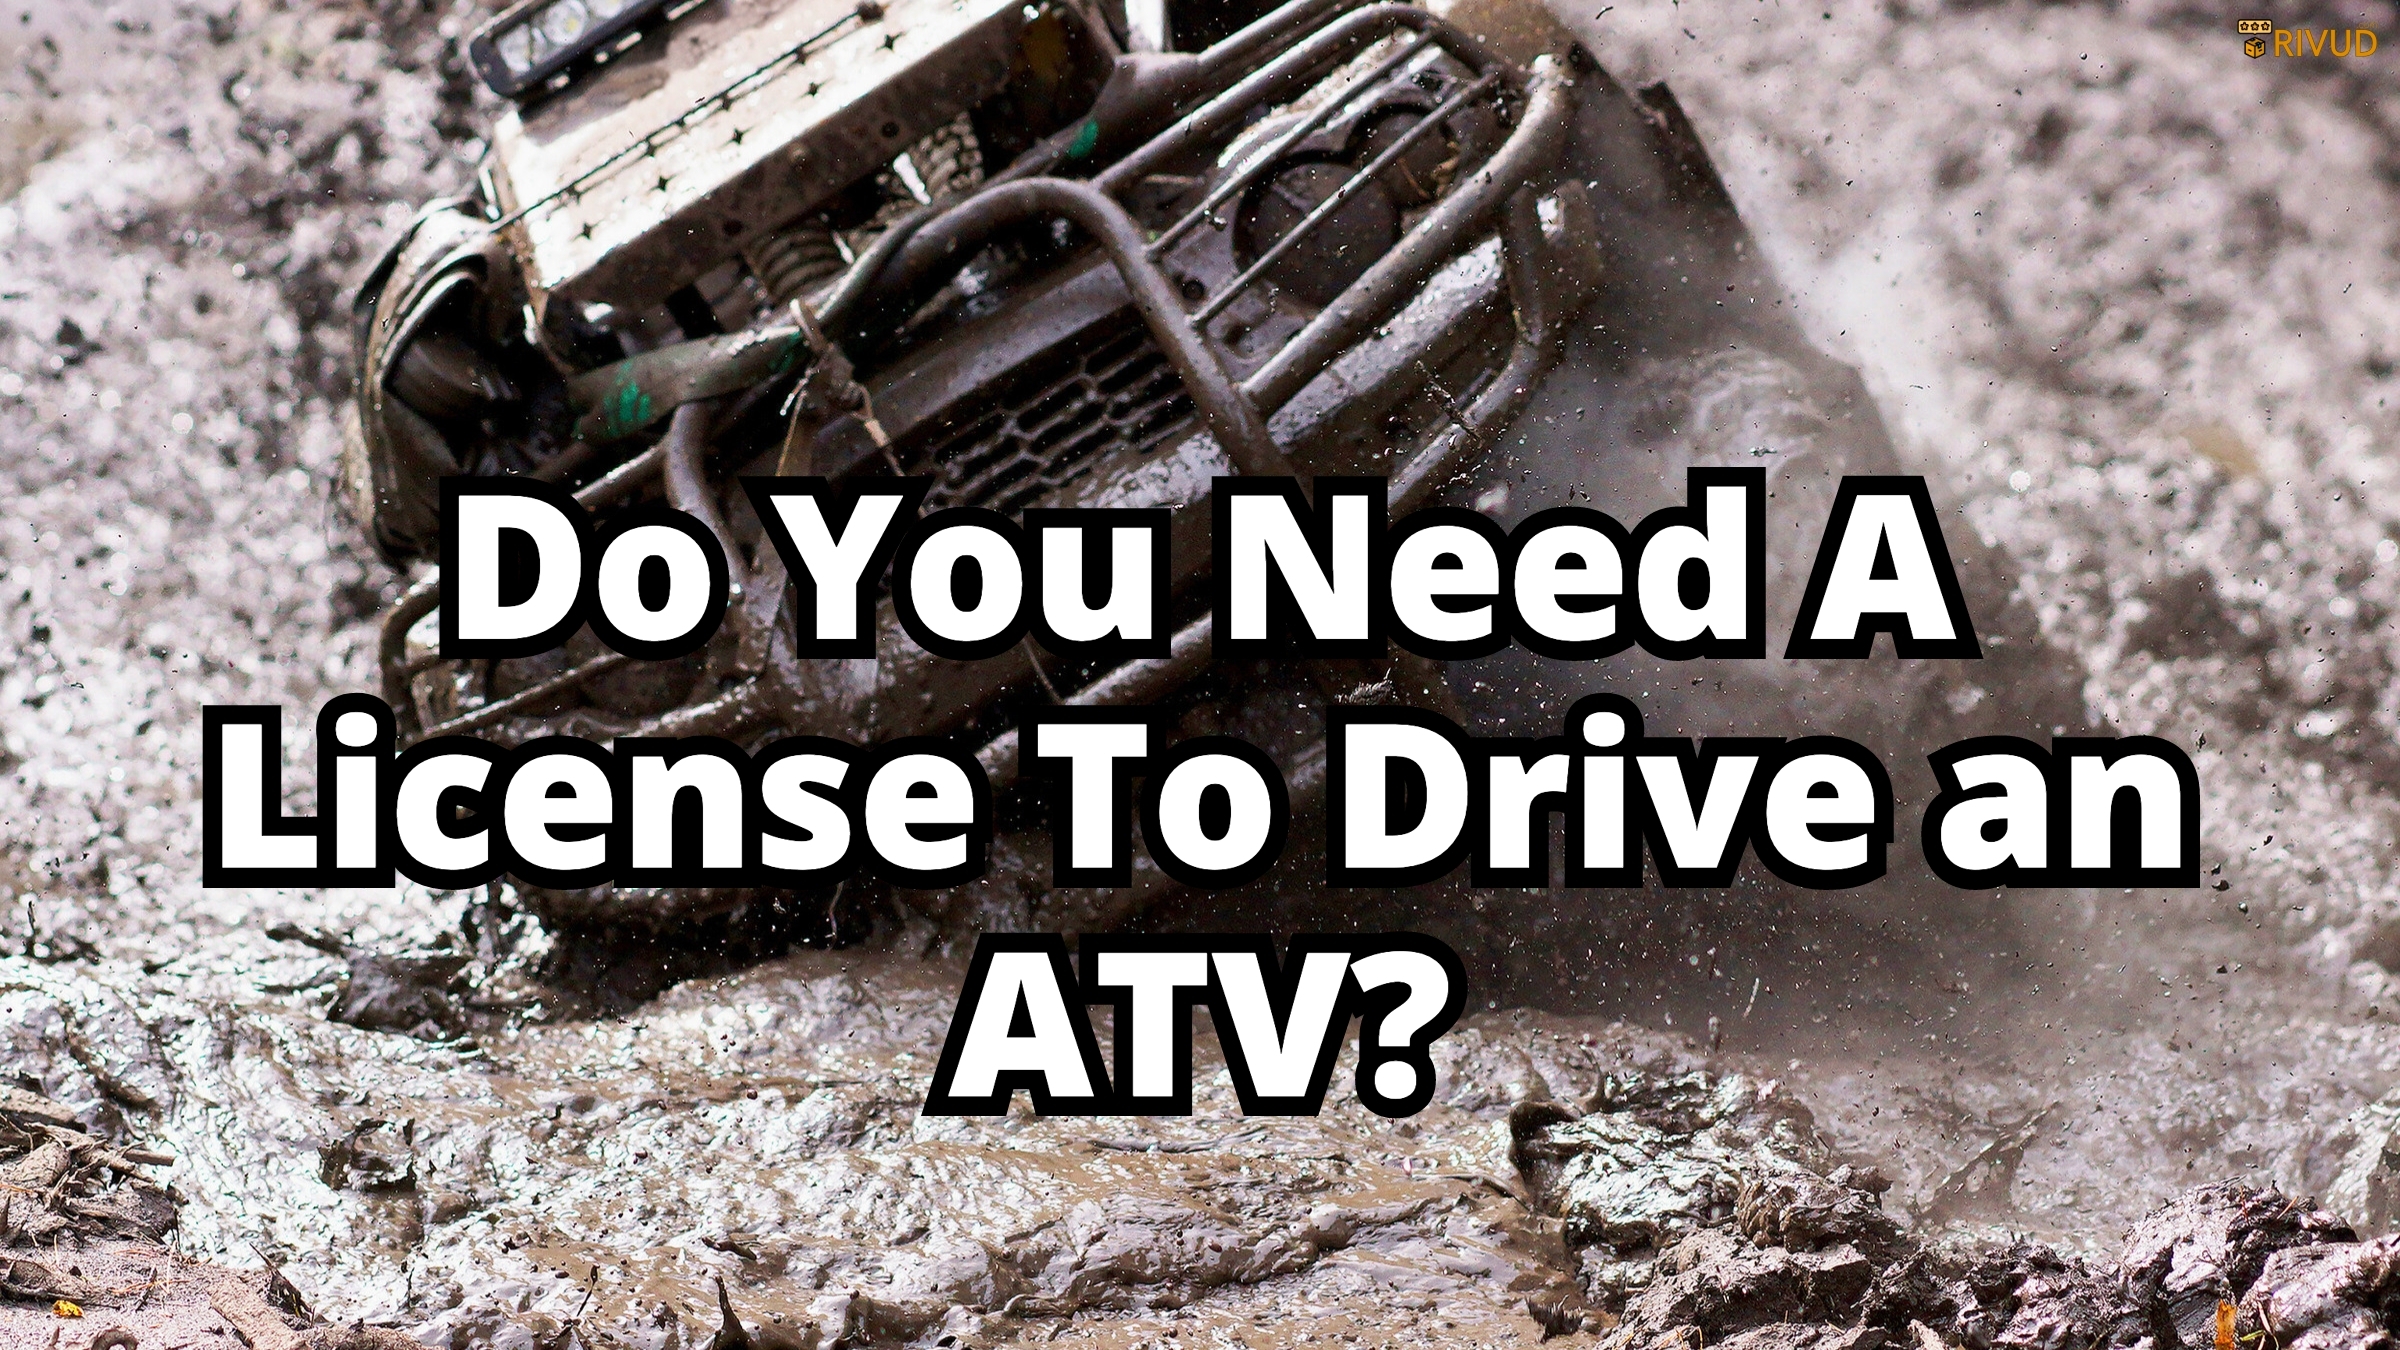 Do You Need A License To Drive An Atv?